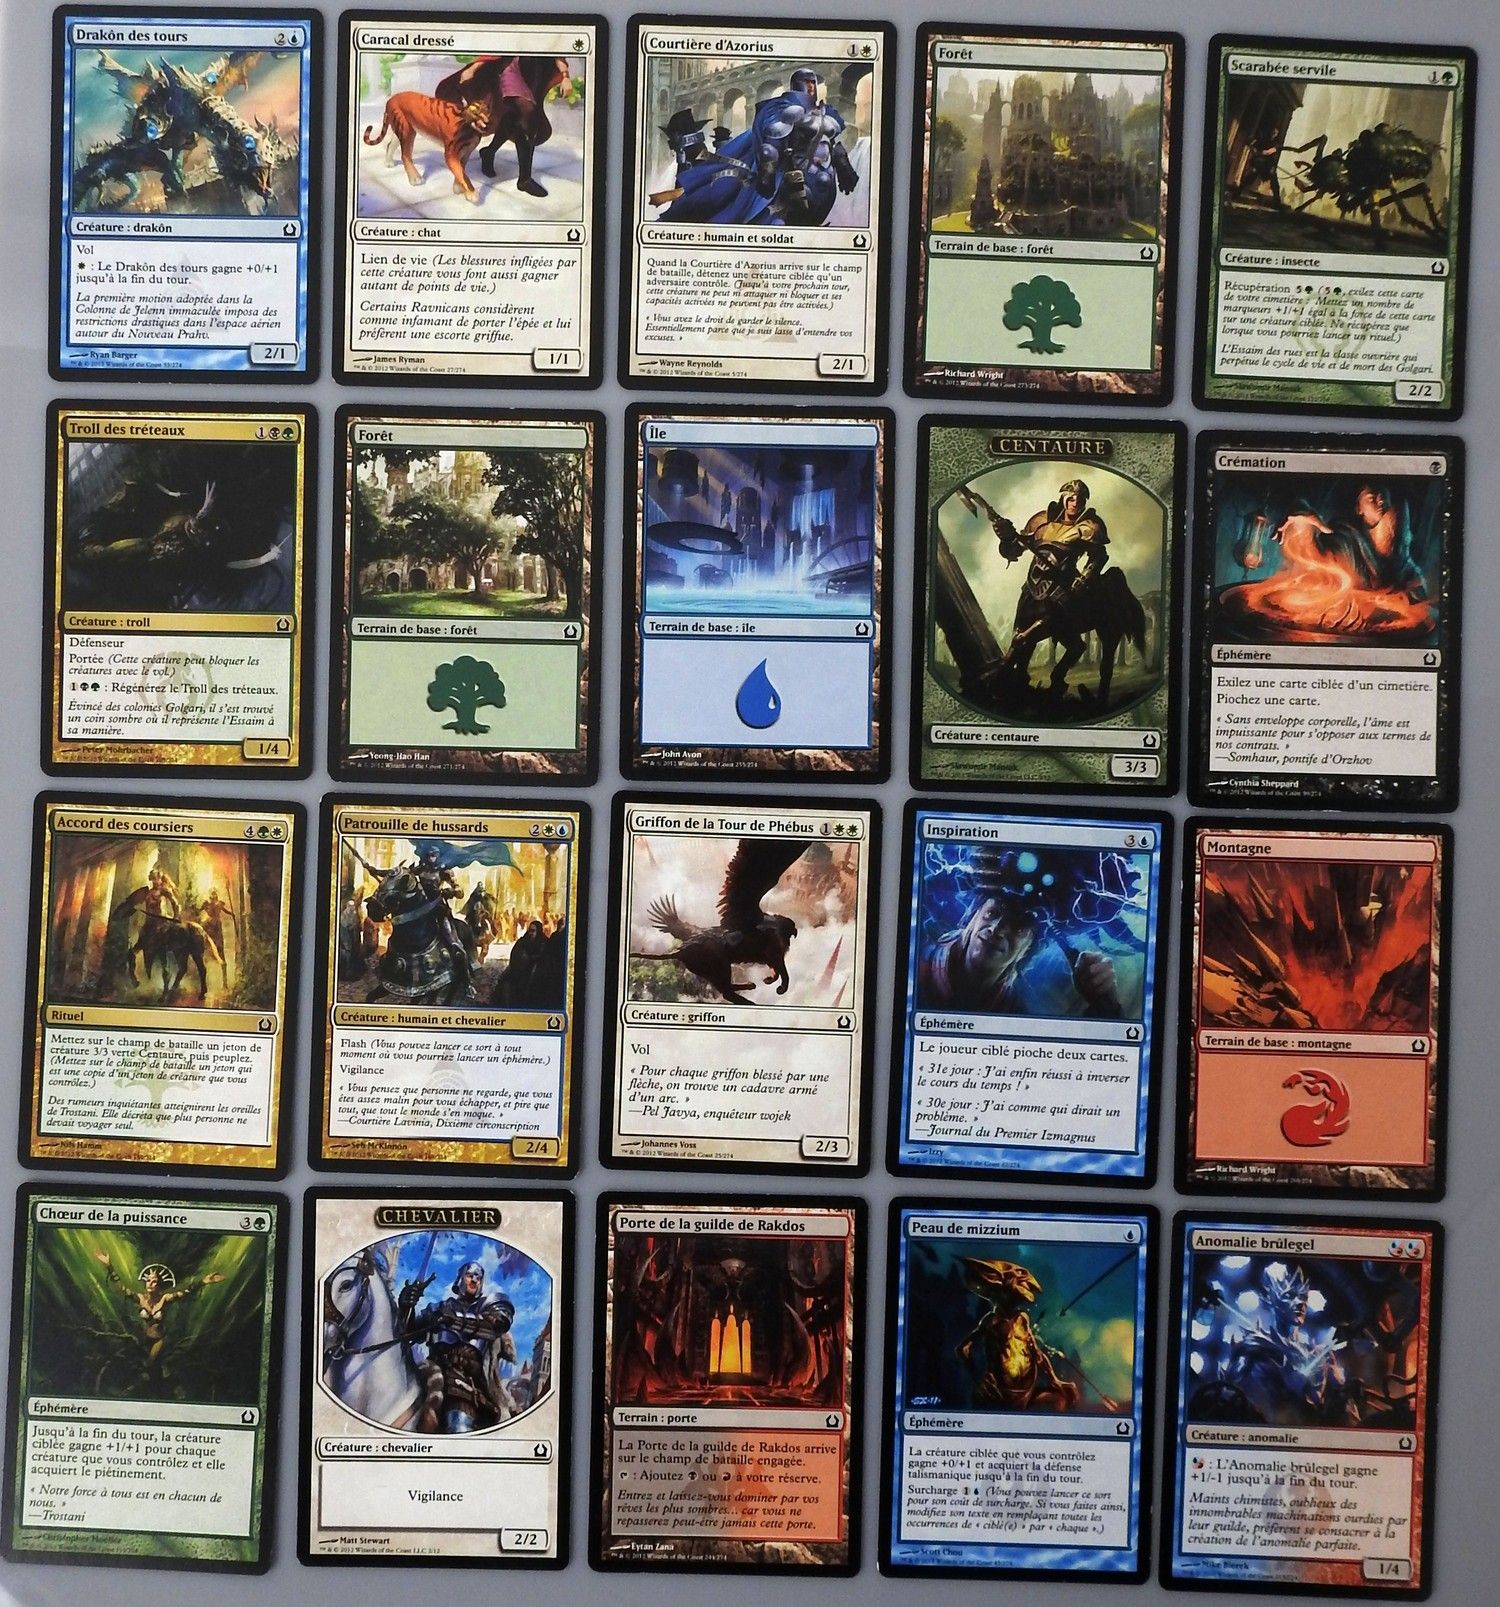 Null RETURN TO RAVNICA
Magic
Set of about 60 cards in superb condition